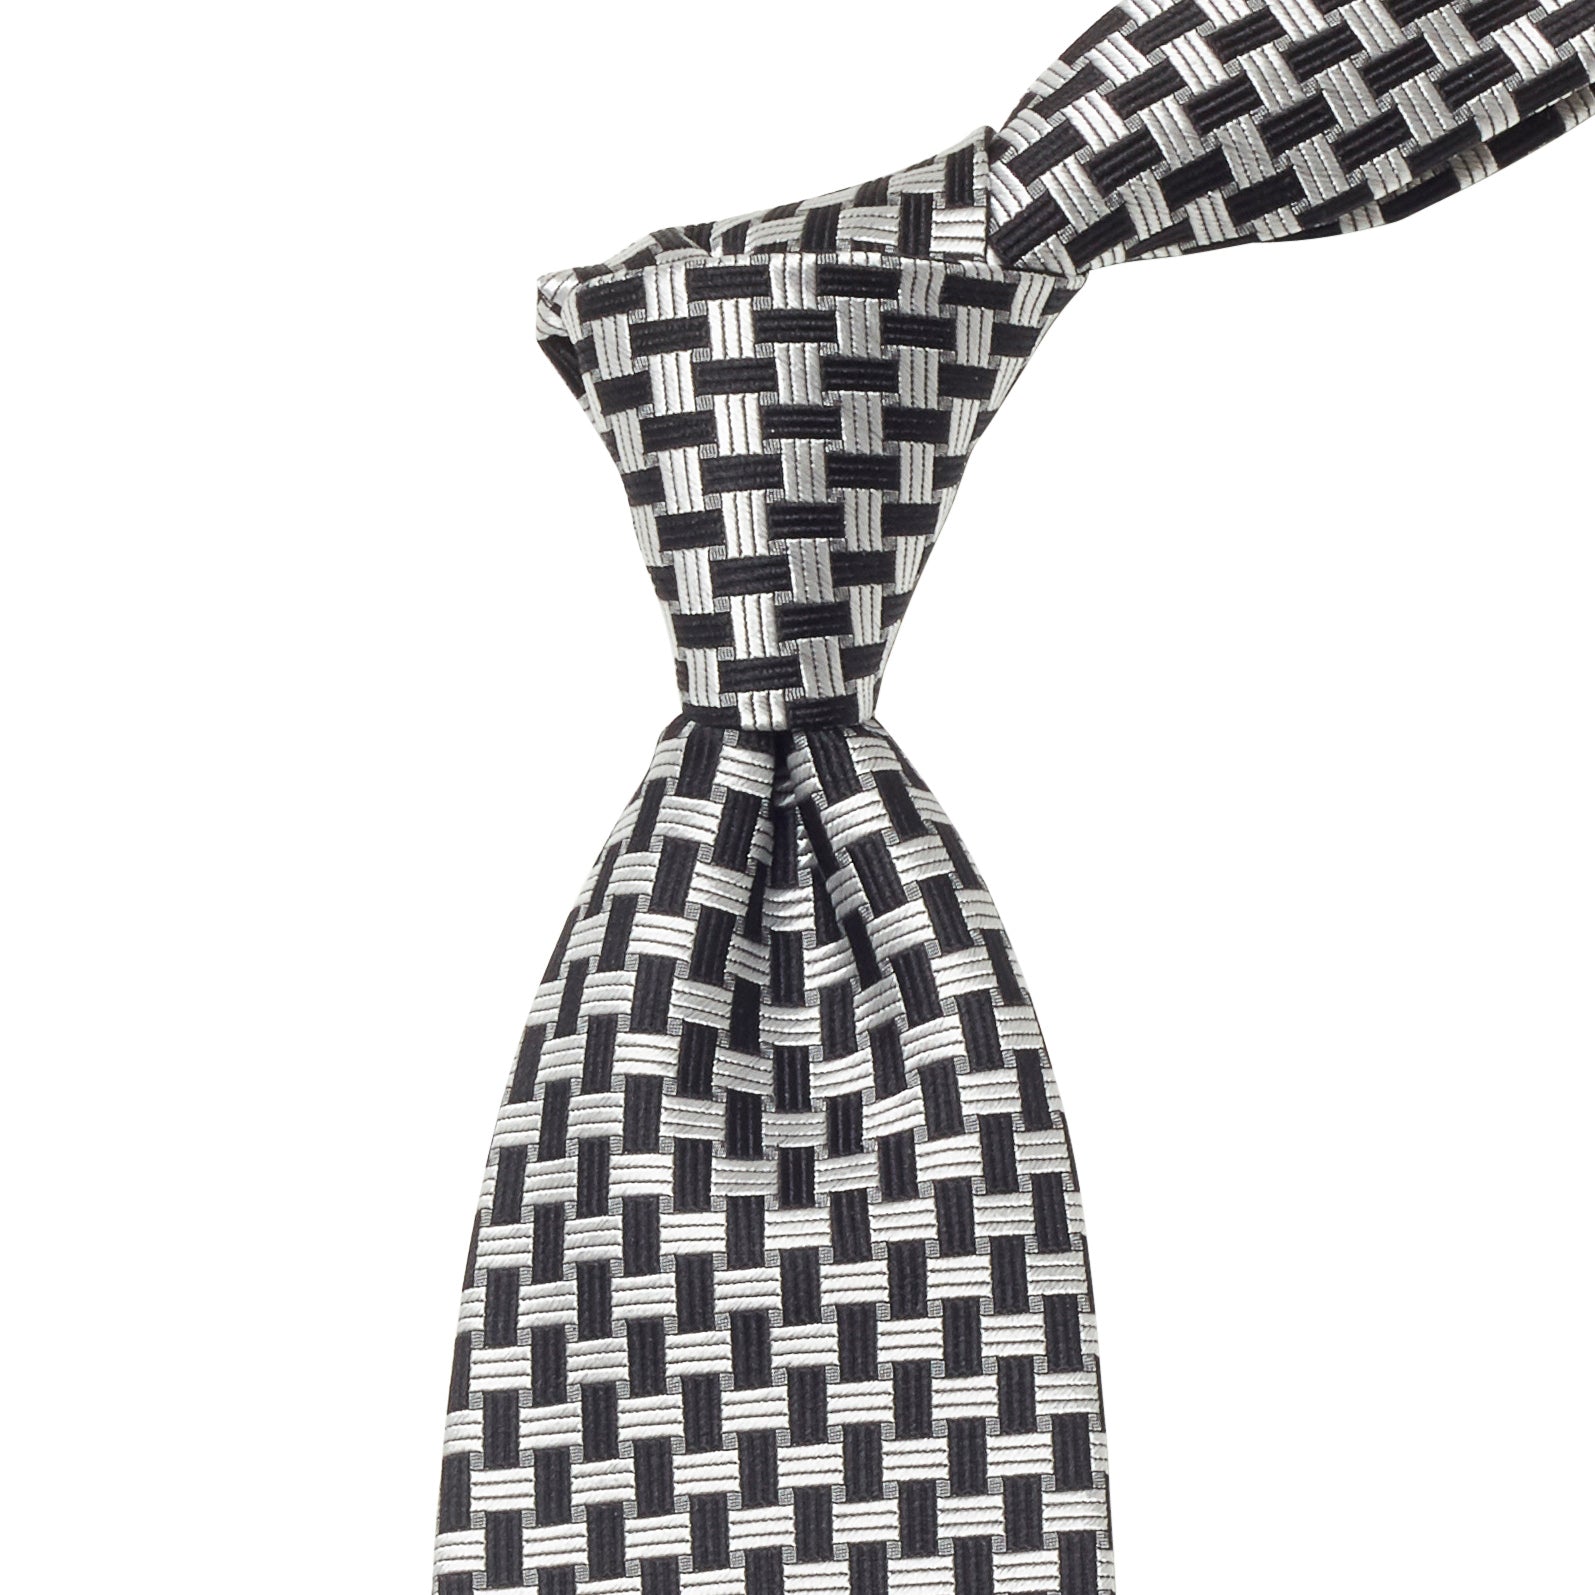 KirbyAllison.com Sovereign Grade Basket Weave Silk Ties with high-quality craftsmanship on a white background.